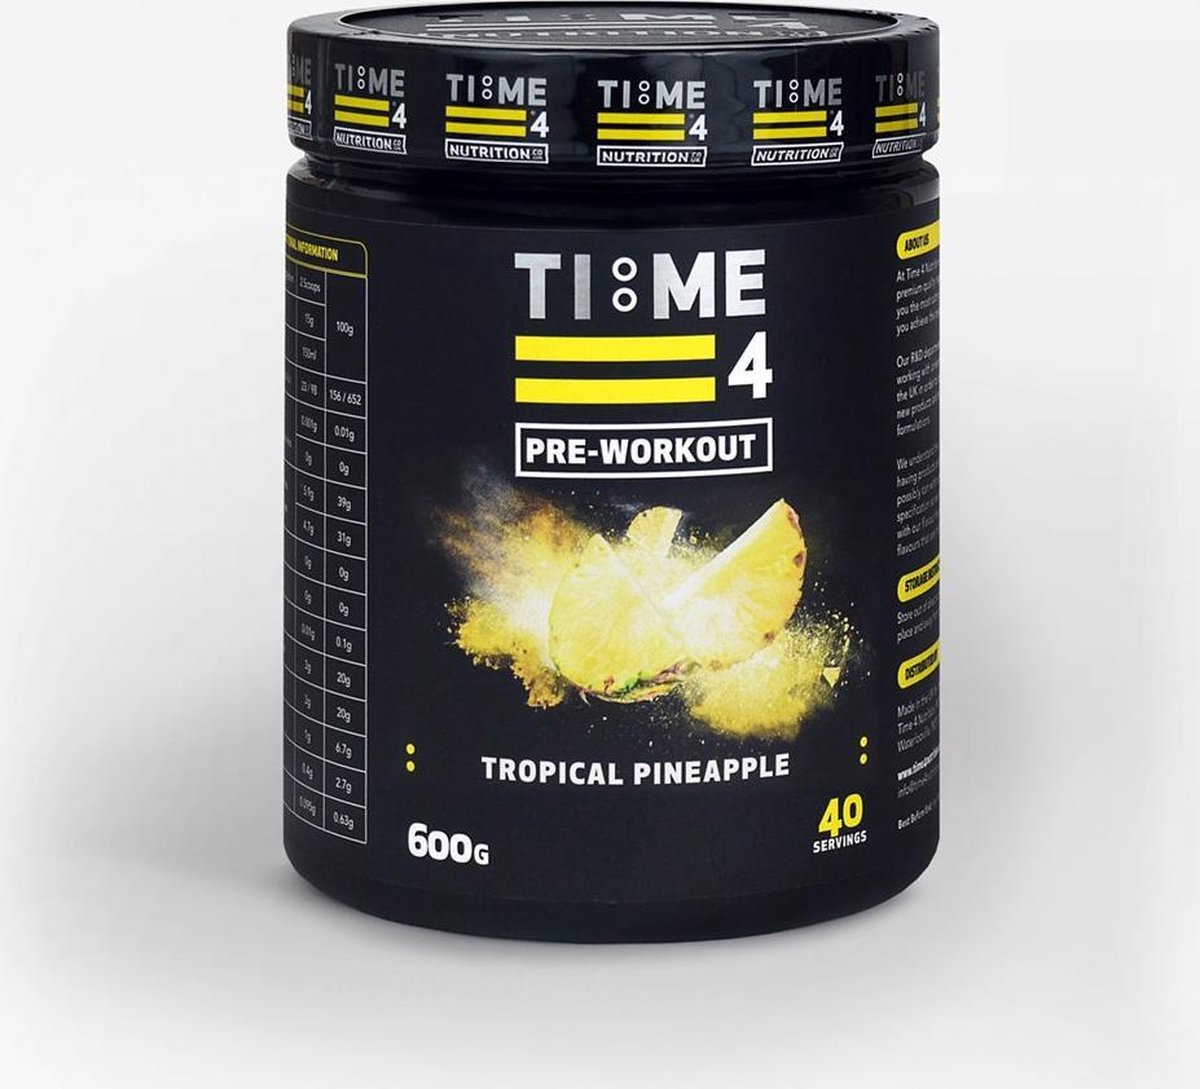 Time 4 Nutrition - Pre Workout - Tropical Pineapple - 600g - 40 servings